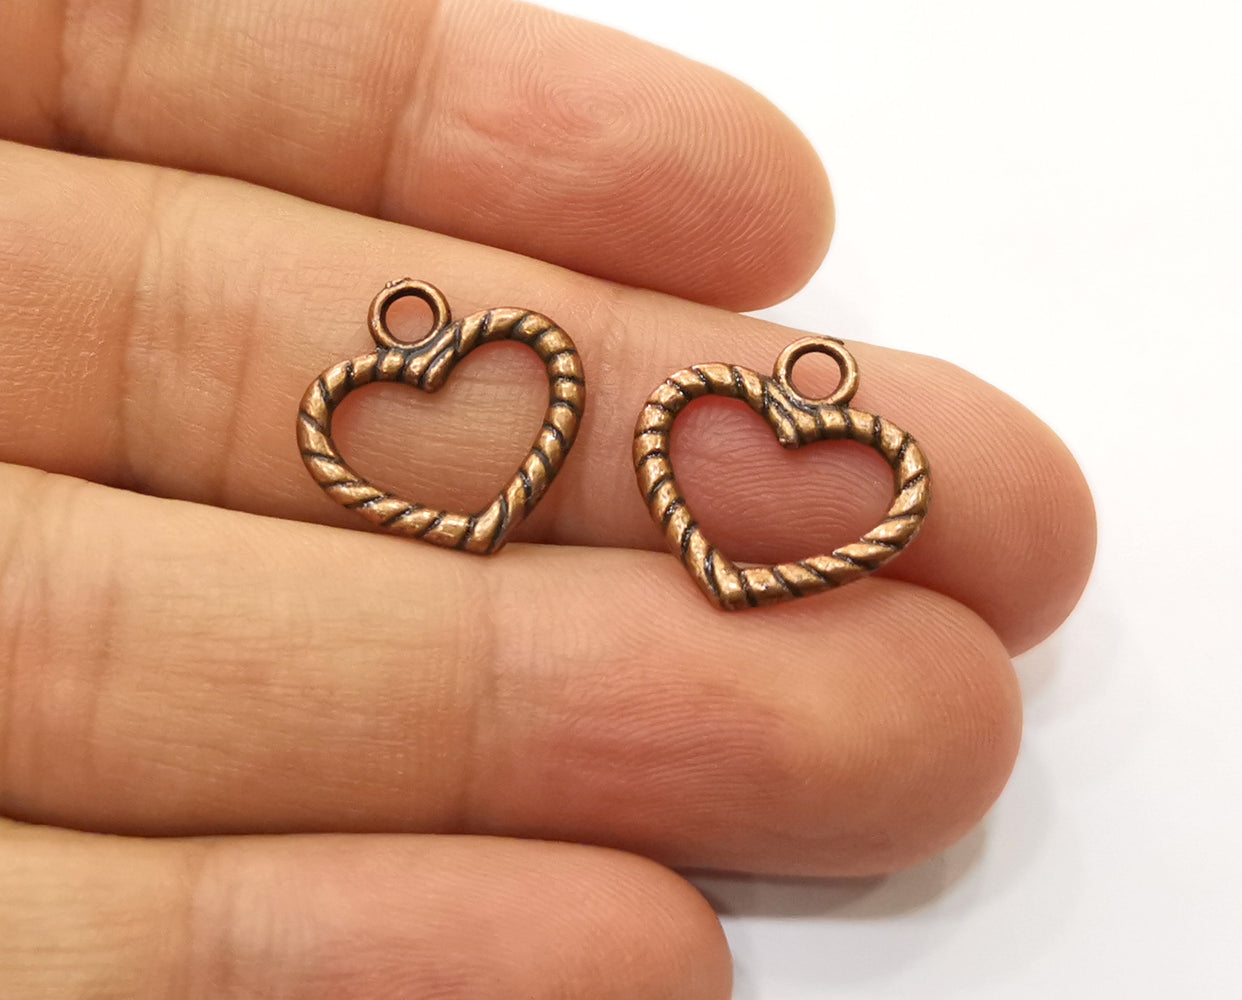 10 Twisted Heart Charms Antique Copper Plated Charms  (17x17mm)  G19406